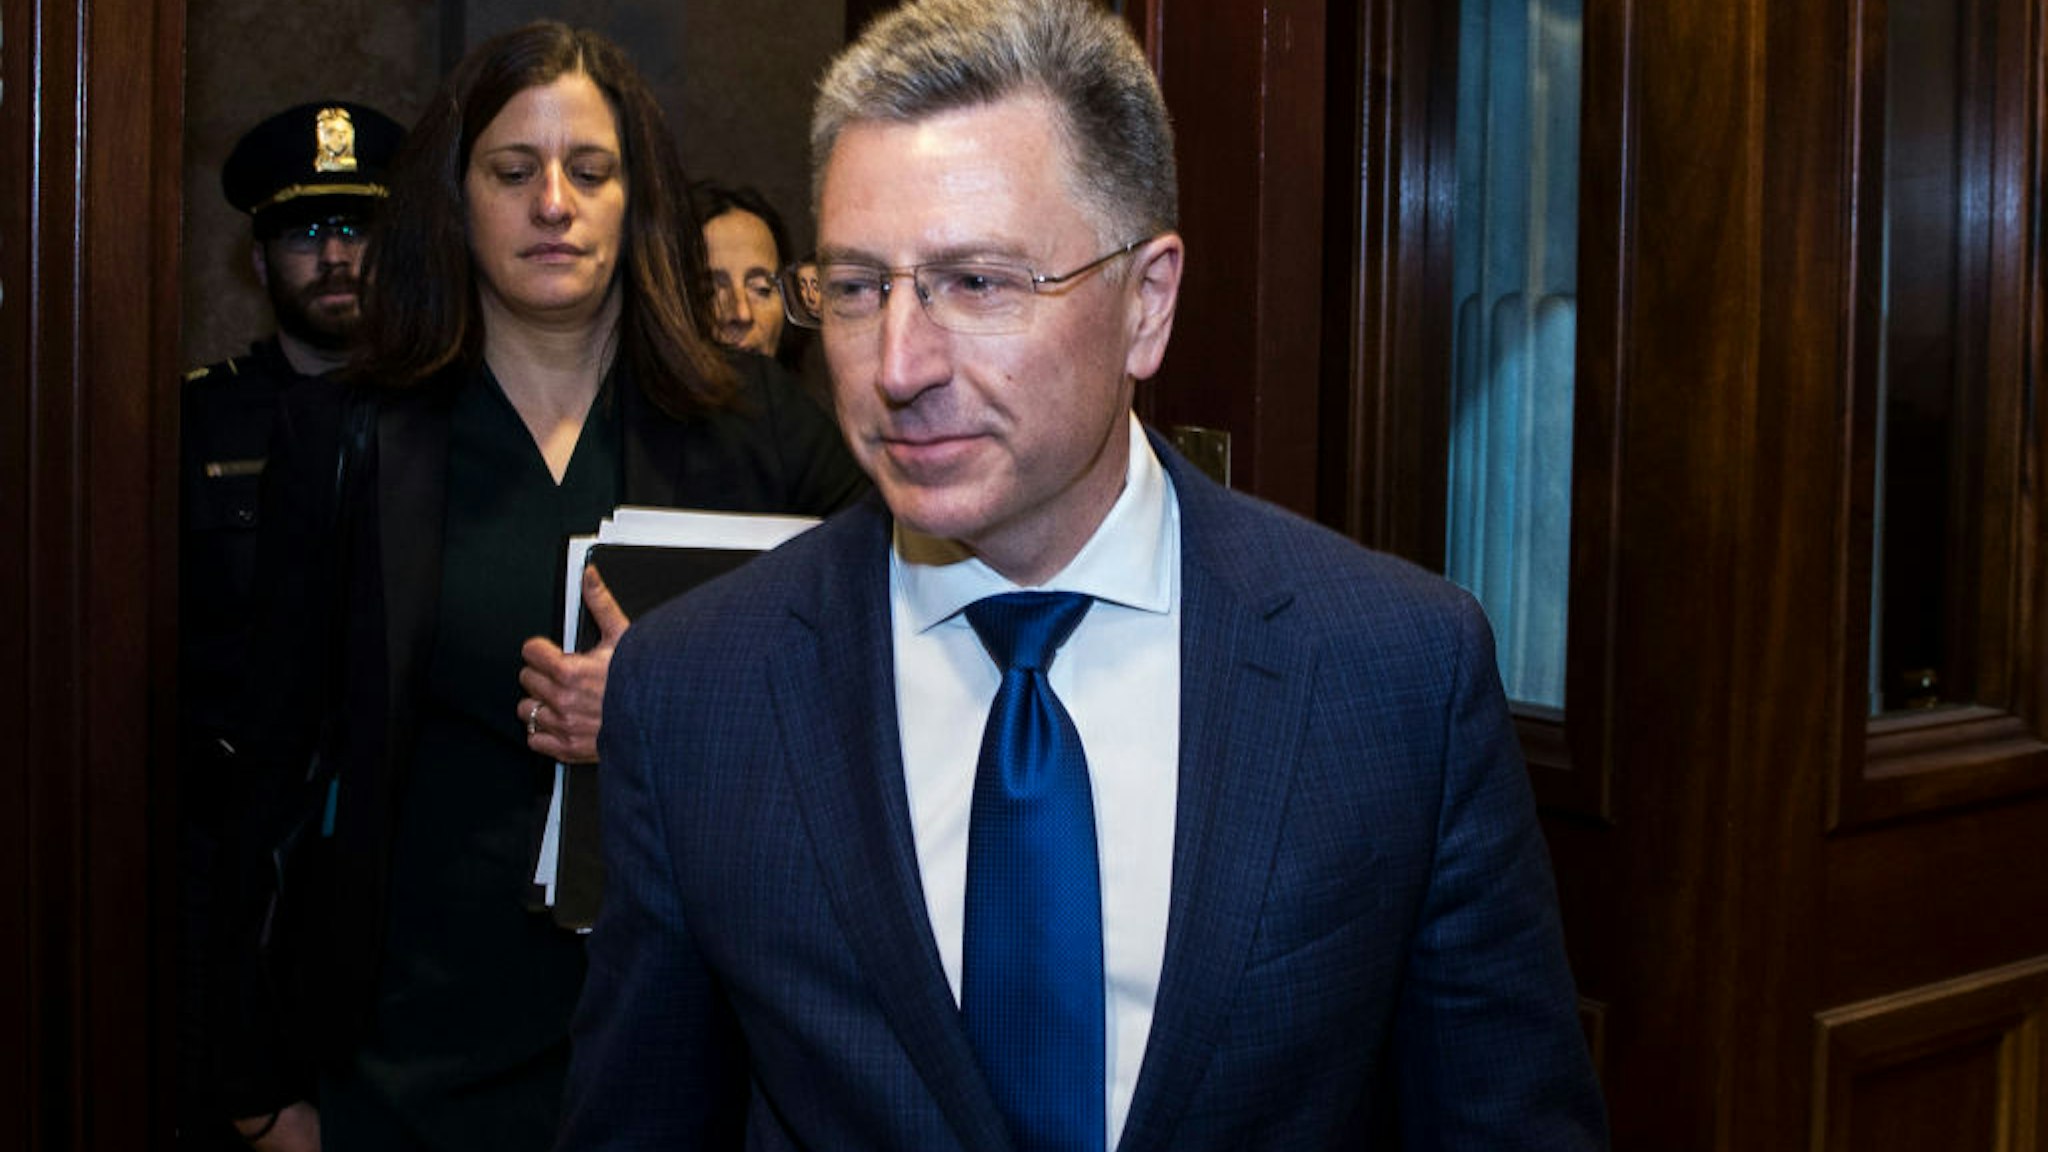 Former Special Envoy to Ukraine Kurt Volker departs following a closed-door deposition led by the House Intelligence Committee on Capitol Hill on October 3, 2019 in Washington, DC. Volker resigned from his position on September 27.